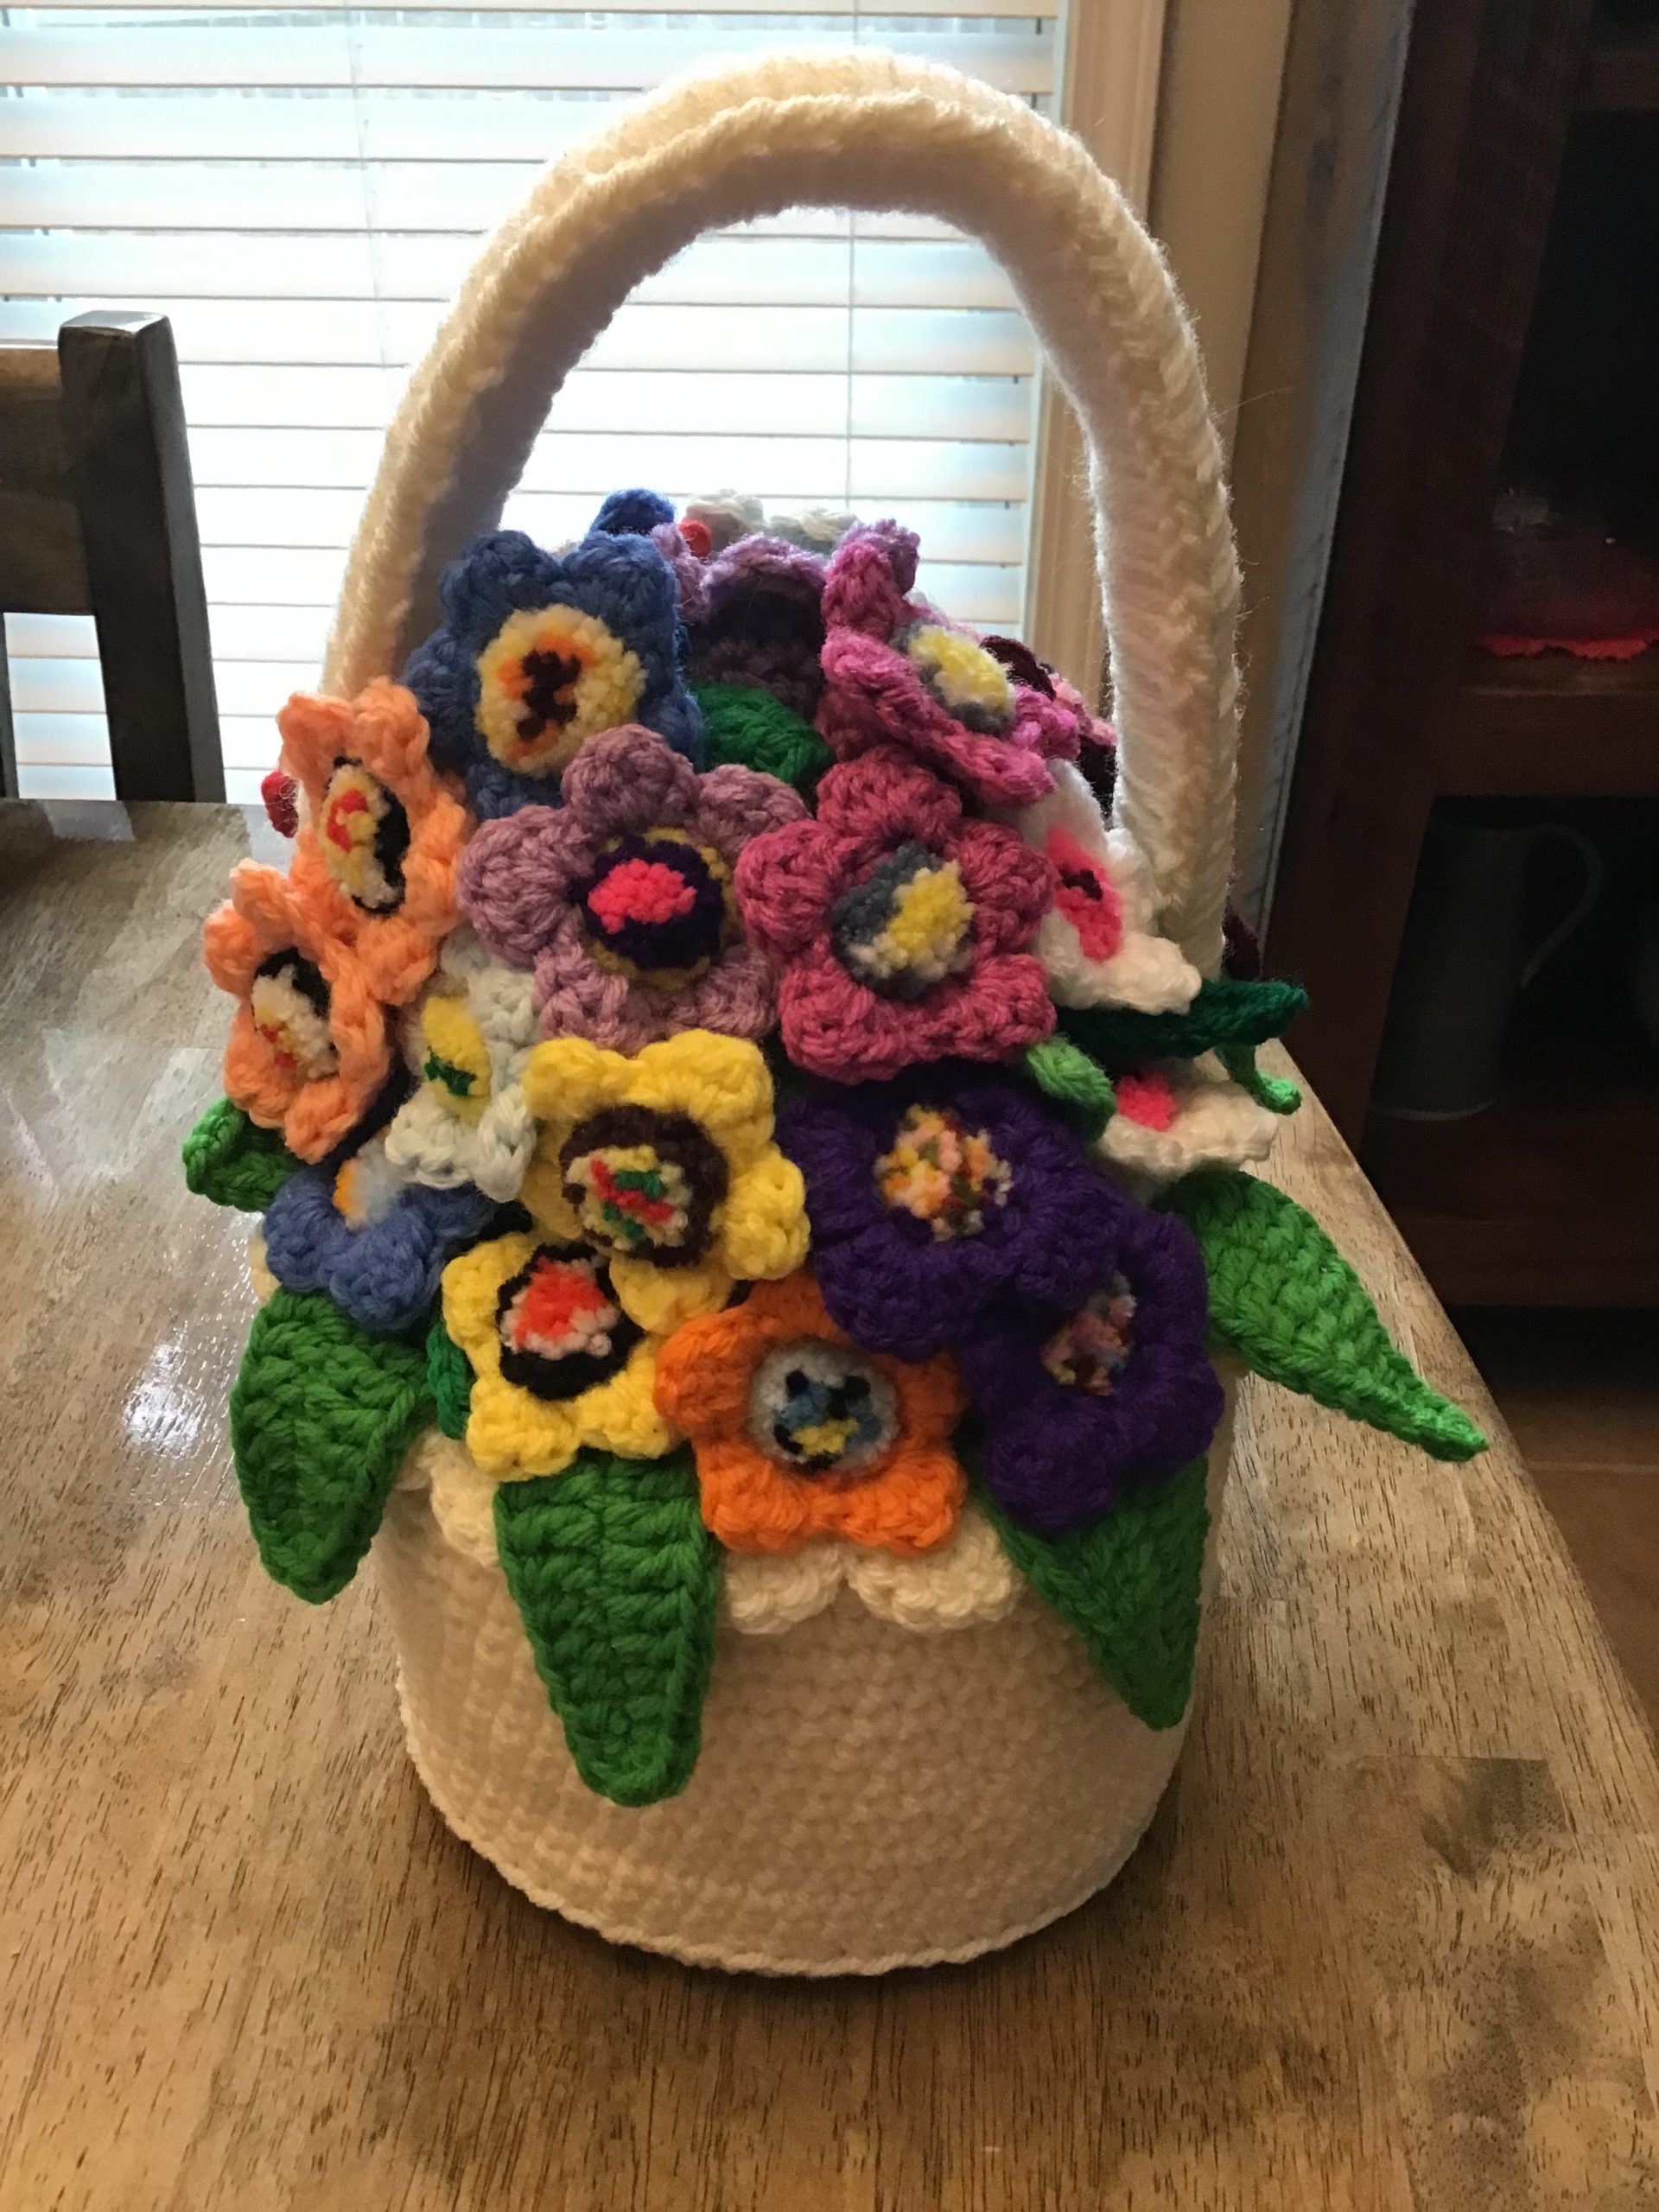 A basket and flowers made from yarn.